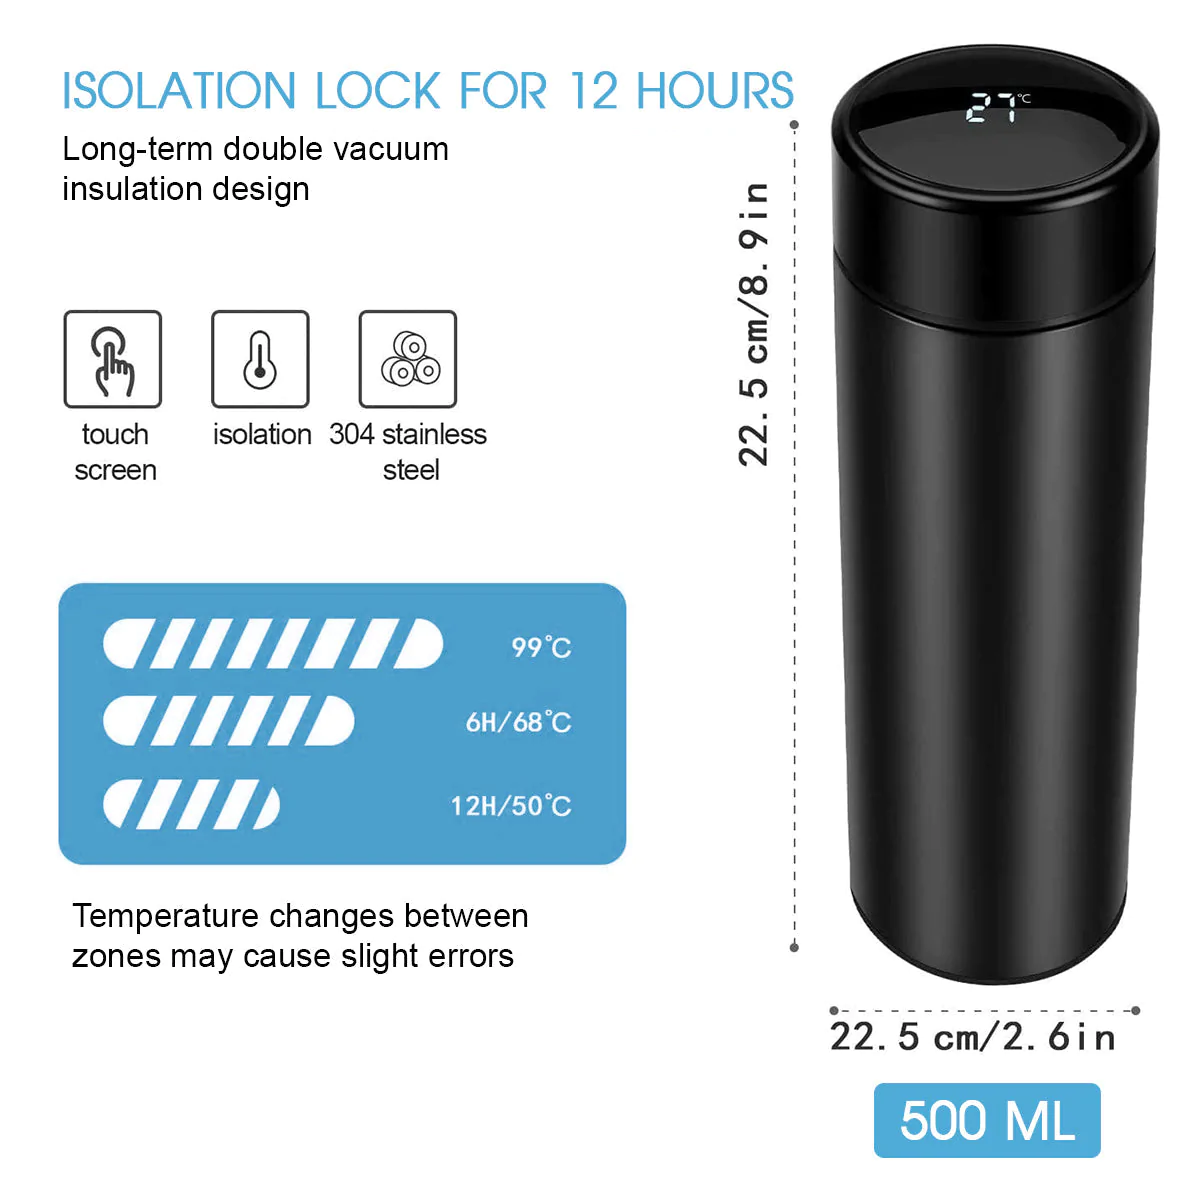 17oz Insulated Water Bottle with LED Temperature Display, Coffee Tea Infuser Bottle Double Wall Vacuum Insulated Water Bottle for Hot or Cold Drink, Stainless Steel Sports Automotive Travel Mug